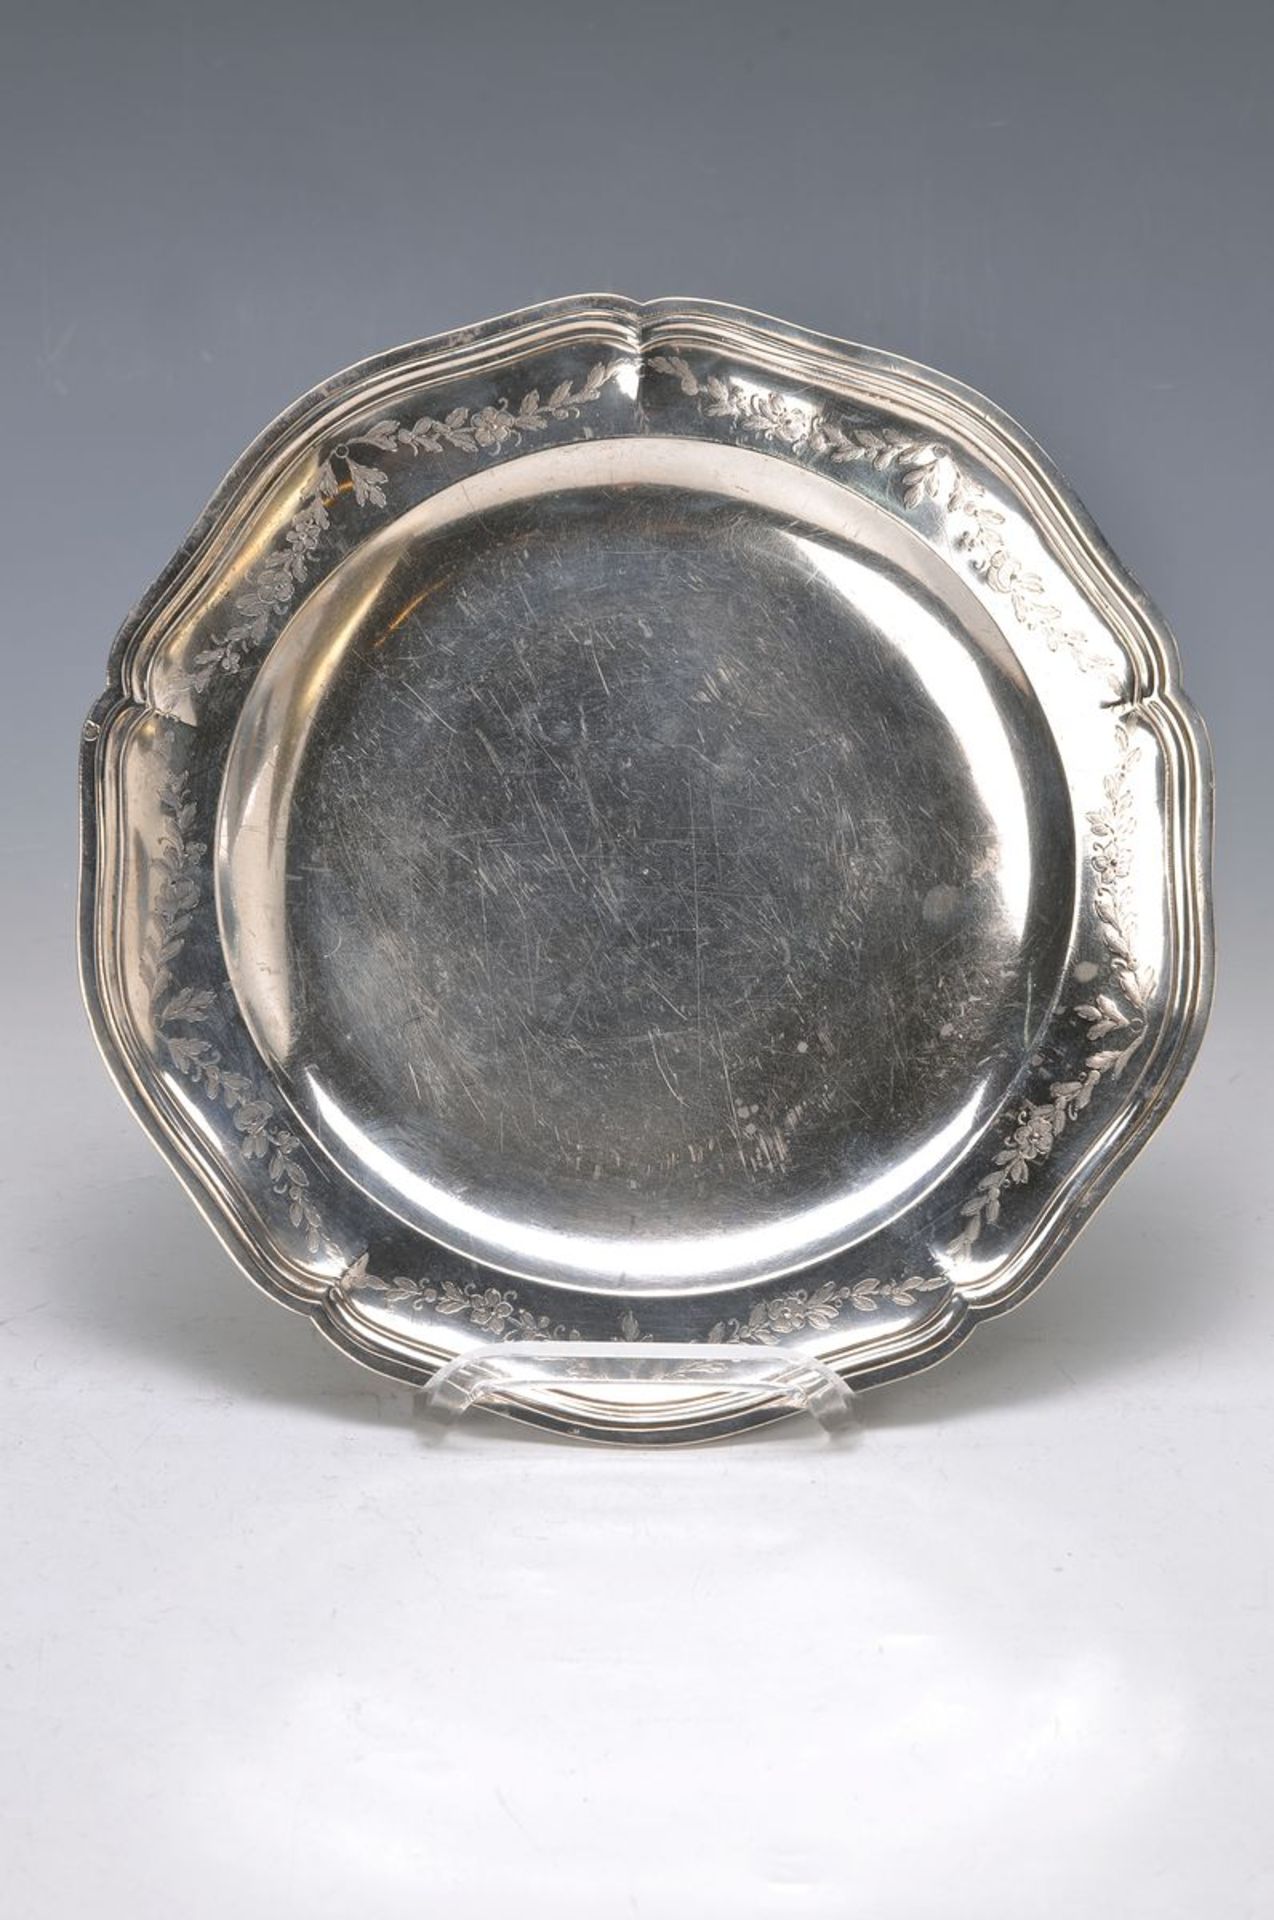 Silver Plate with flower border, France, around 1770/80, profiled, verso hallmarked andmarked